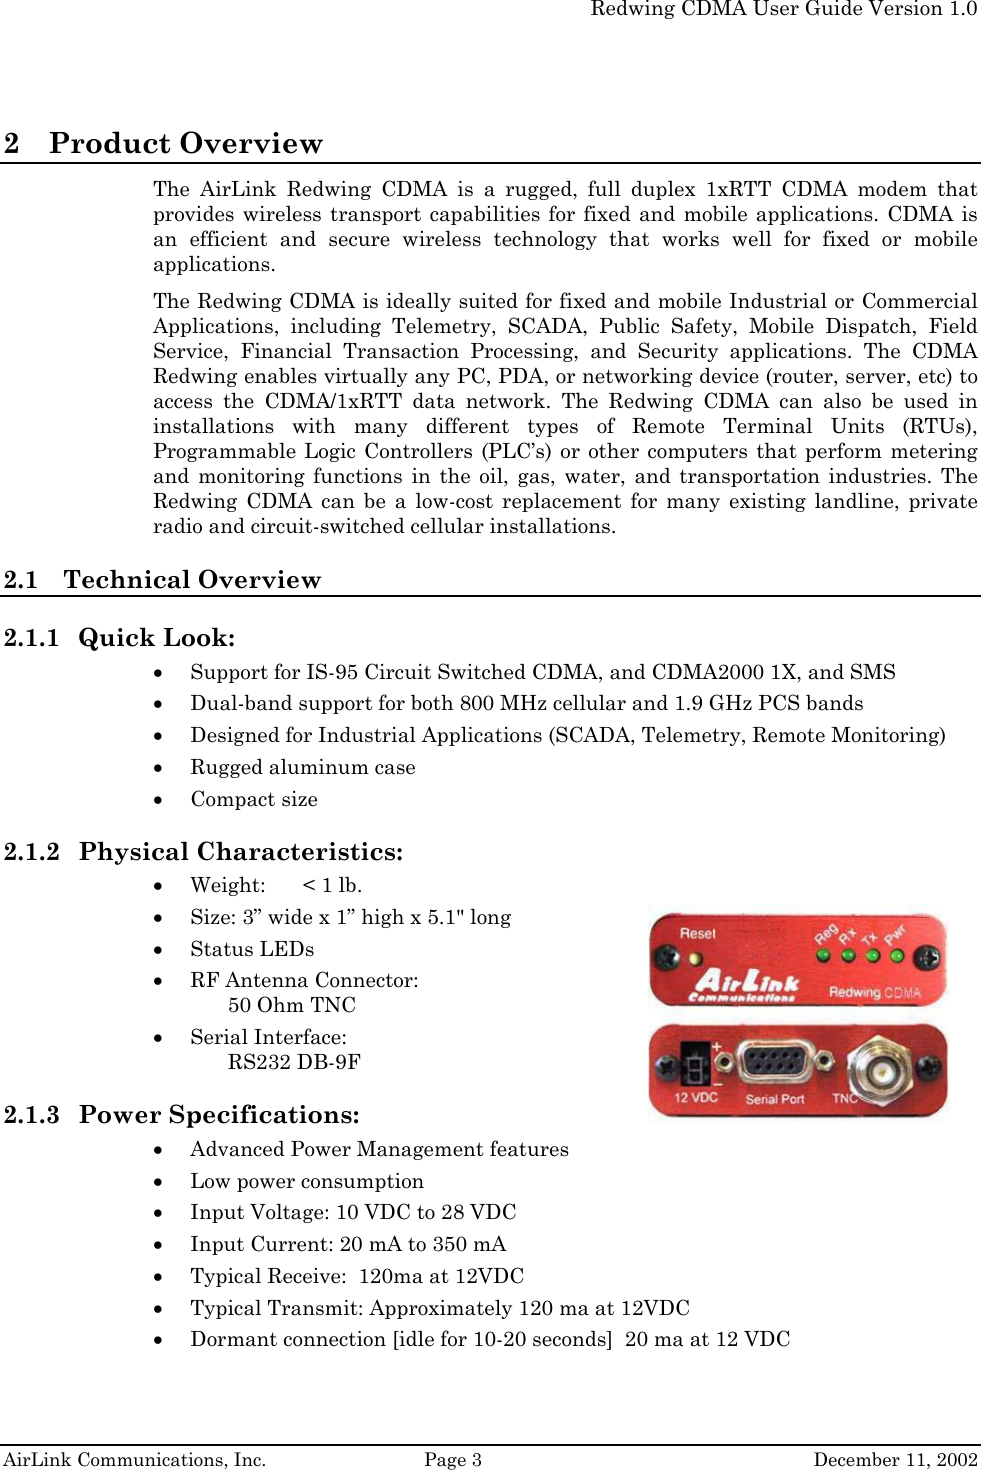   Redwing CDMA User Guide Version 1.0   AirLink Communications, Inc.  Page 3  December 11, 2002 2 Product Overview The AirLink Redwing CDMA is a rugged, full duplex 1xRTT CDMA modem that provides wireless transport capabilities for fixed and mobile applications. CDMA is an efficient and secure wireless technology that works well for fixed or mobile applications.  The Redwing CDMA is ideally suited for fixed and mobile Industrial or Commercial Applications, including Telemetry, SCADA, Public Safety, Mobile Dispatch, Field Service, Financial Transaction Processing, and Security applications. The CDMA Redwing enables virtually any PC, PDA, or networking device (router, server, etc) to access the CDMA/1xRTT data network. The Redwing CDMA can also be used in installations with many different types of Remote Terminal Units (RTUs), Programmable Logic Controllers (PLC’s) or other computers that perform metering and monitoring functions in the oil, gas, water, and transportation industries. The Redwing CDMA can be a low-cost replacement for many existing landline, private radio and circuit-switched cellular installations. 2.1 Technical Overview 2.1.1 Quick Look: • Support for IS-95 Circuit Switched CDMA, and CDMA2000 1X, and SMS • Dual-band support for both 800 MHz cellular and 1.9 GHz PCS bands • Designed for Industrial Applications (SCADA, Telemetry, Remote Monitoring) • Rugged aluminum case • Compact size 2.1.2 Physical Characteristics: • Weight:  &lt; 1 lb. • Size: 3” wide x 1” high x 5.1&quot; long • Status LEDs  • RF Antenna Connector: 50 Ohm TNC • Serial Interface: RS232 DB-9F 2.1.3 Power Specifications:   • Advanced Power Management features • Low power consumption • Input Voltage: 10 VDC to 28 VDC • Input Current: 20 mA to 350 mA • Typical Receive:  120ma at 12VDC • Typical Transmit: Approximately 120 ma at 12VDC • Dormant connection [idle for 10-20 seconds]  20 ma at 12 VDC 